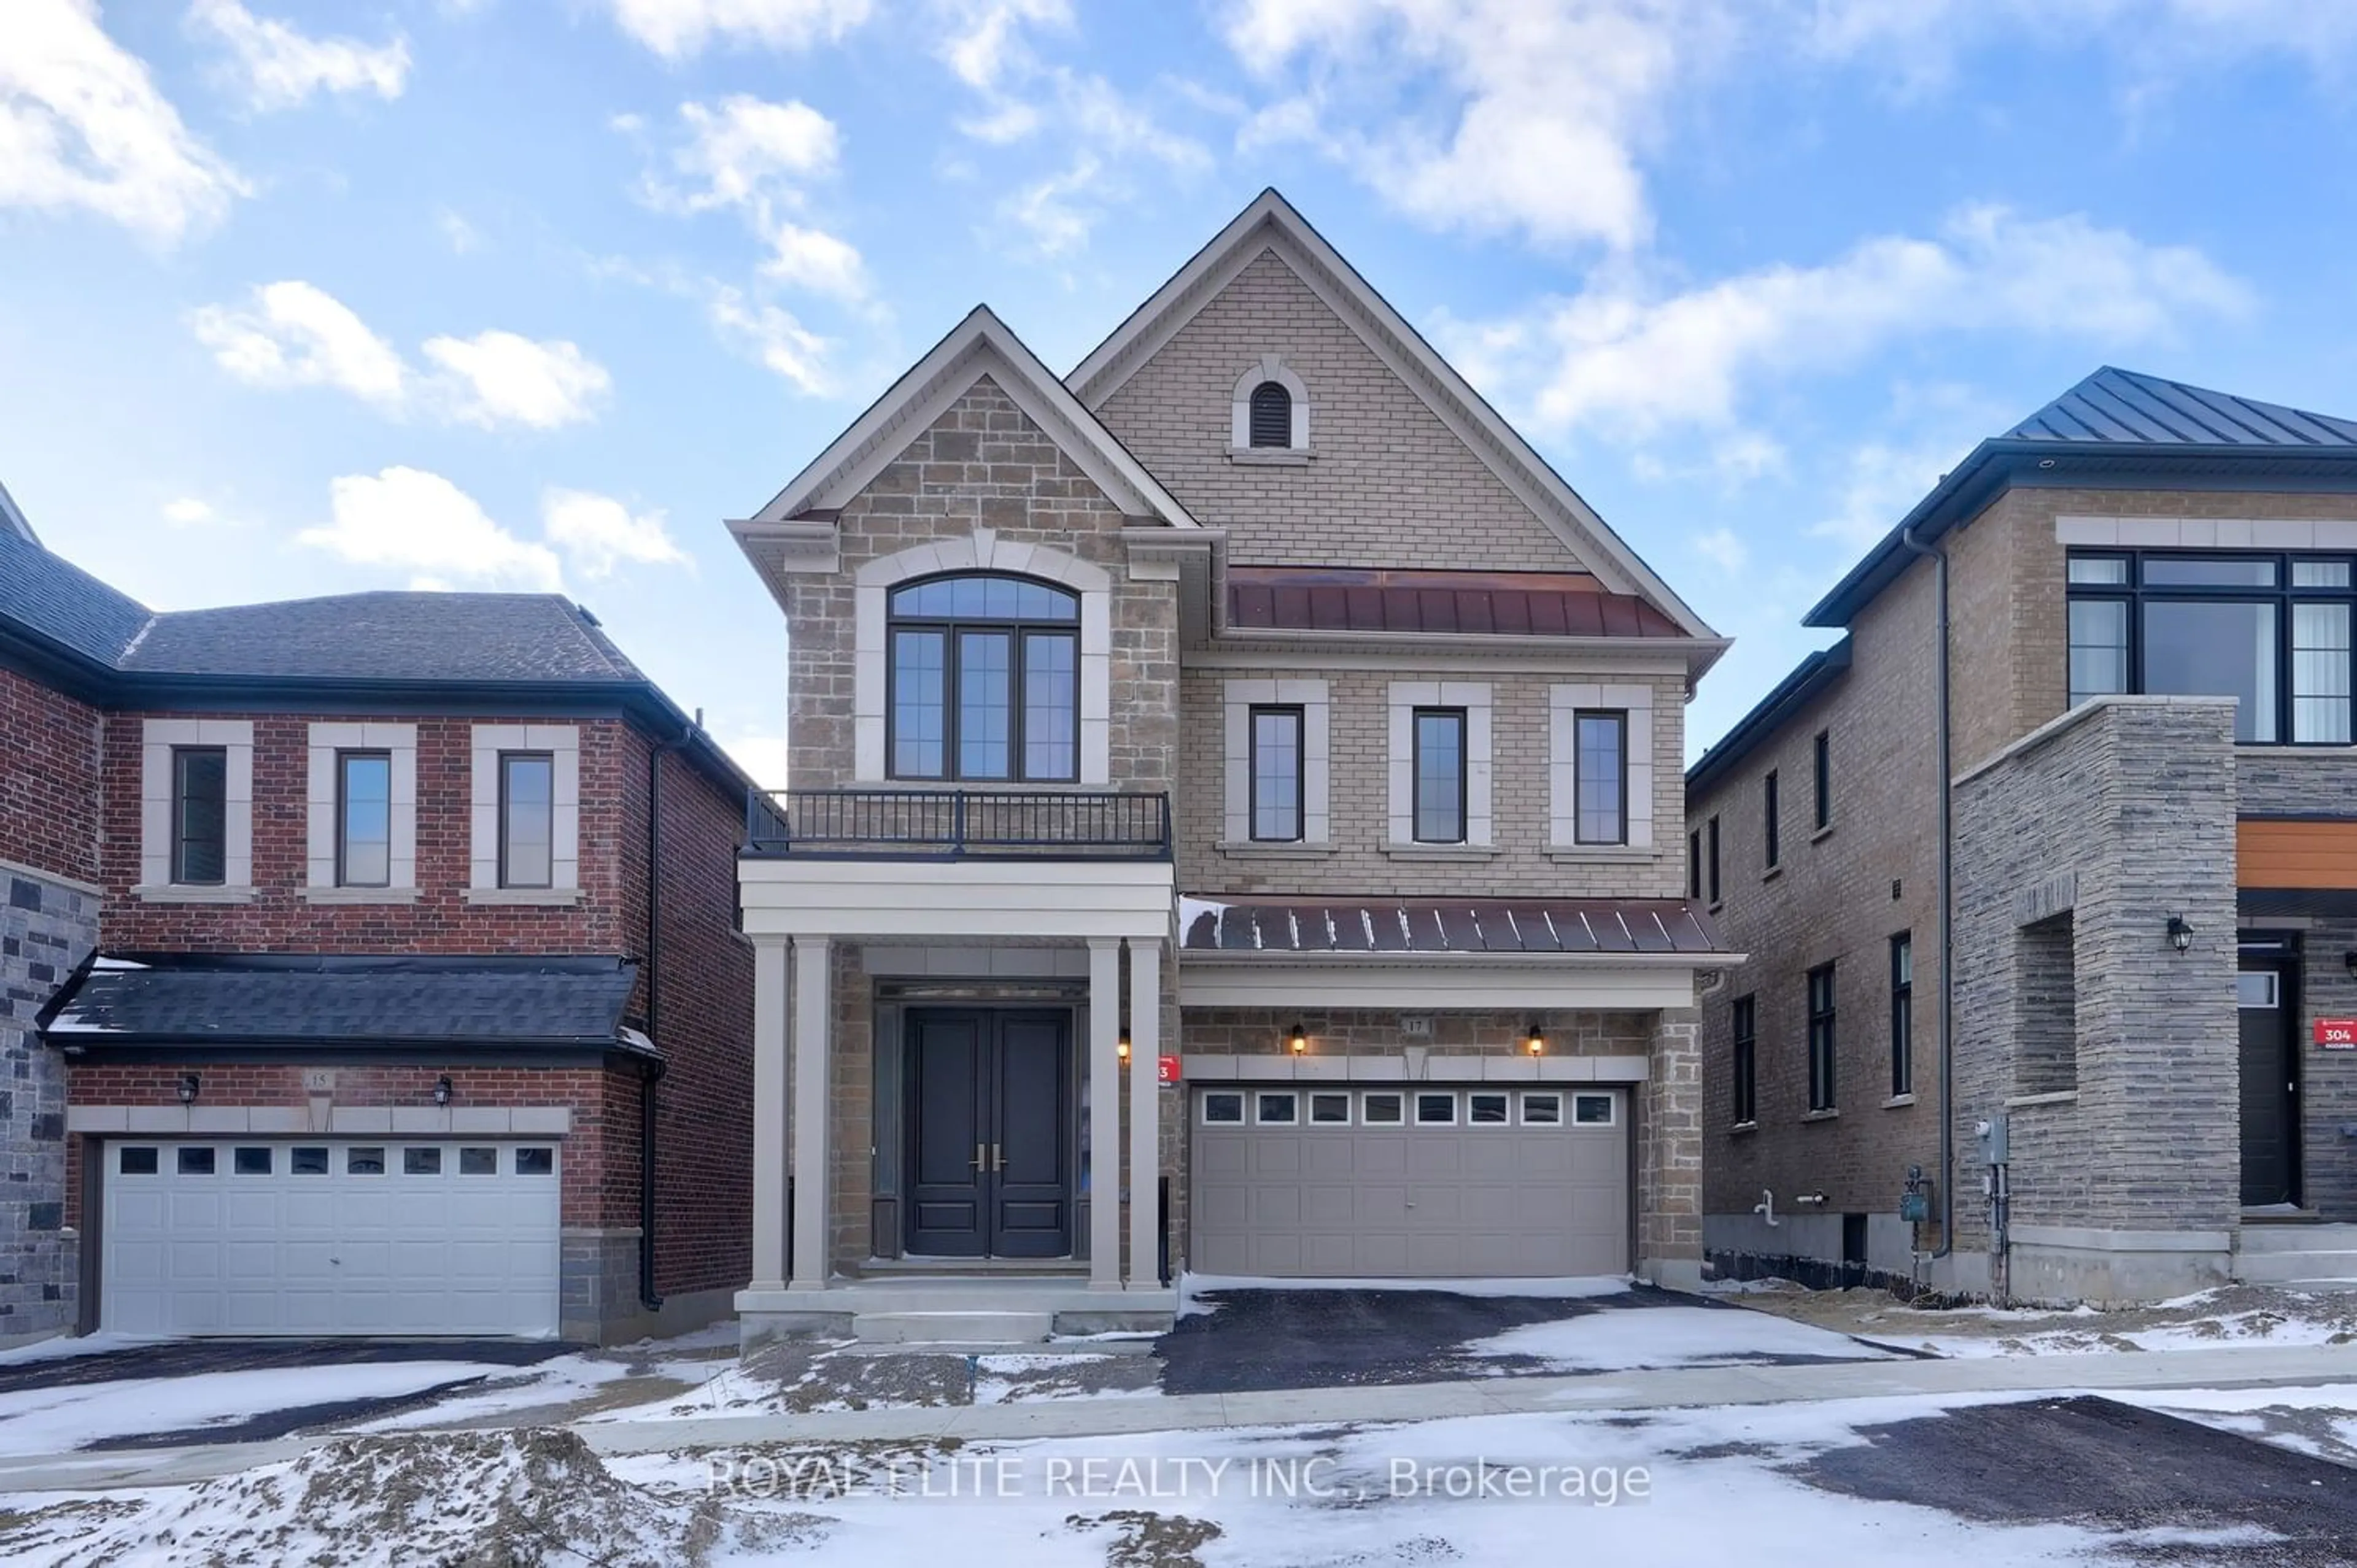 Home with brick exterior material for 17 William Logan Dr, Richmond Hill Ontario L4E 1A2